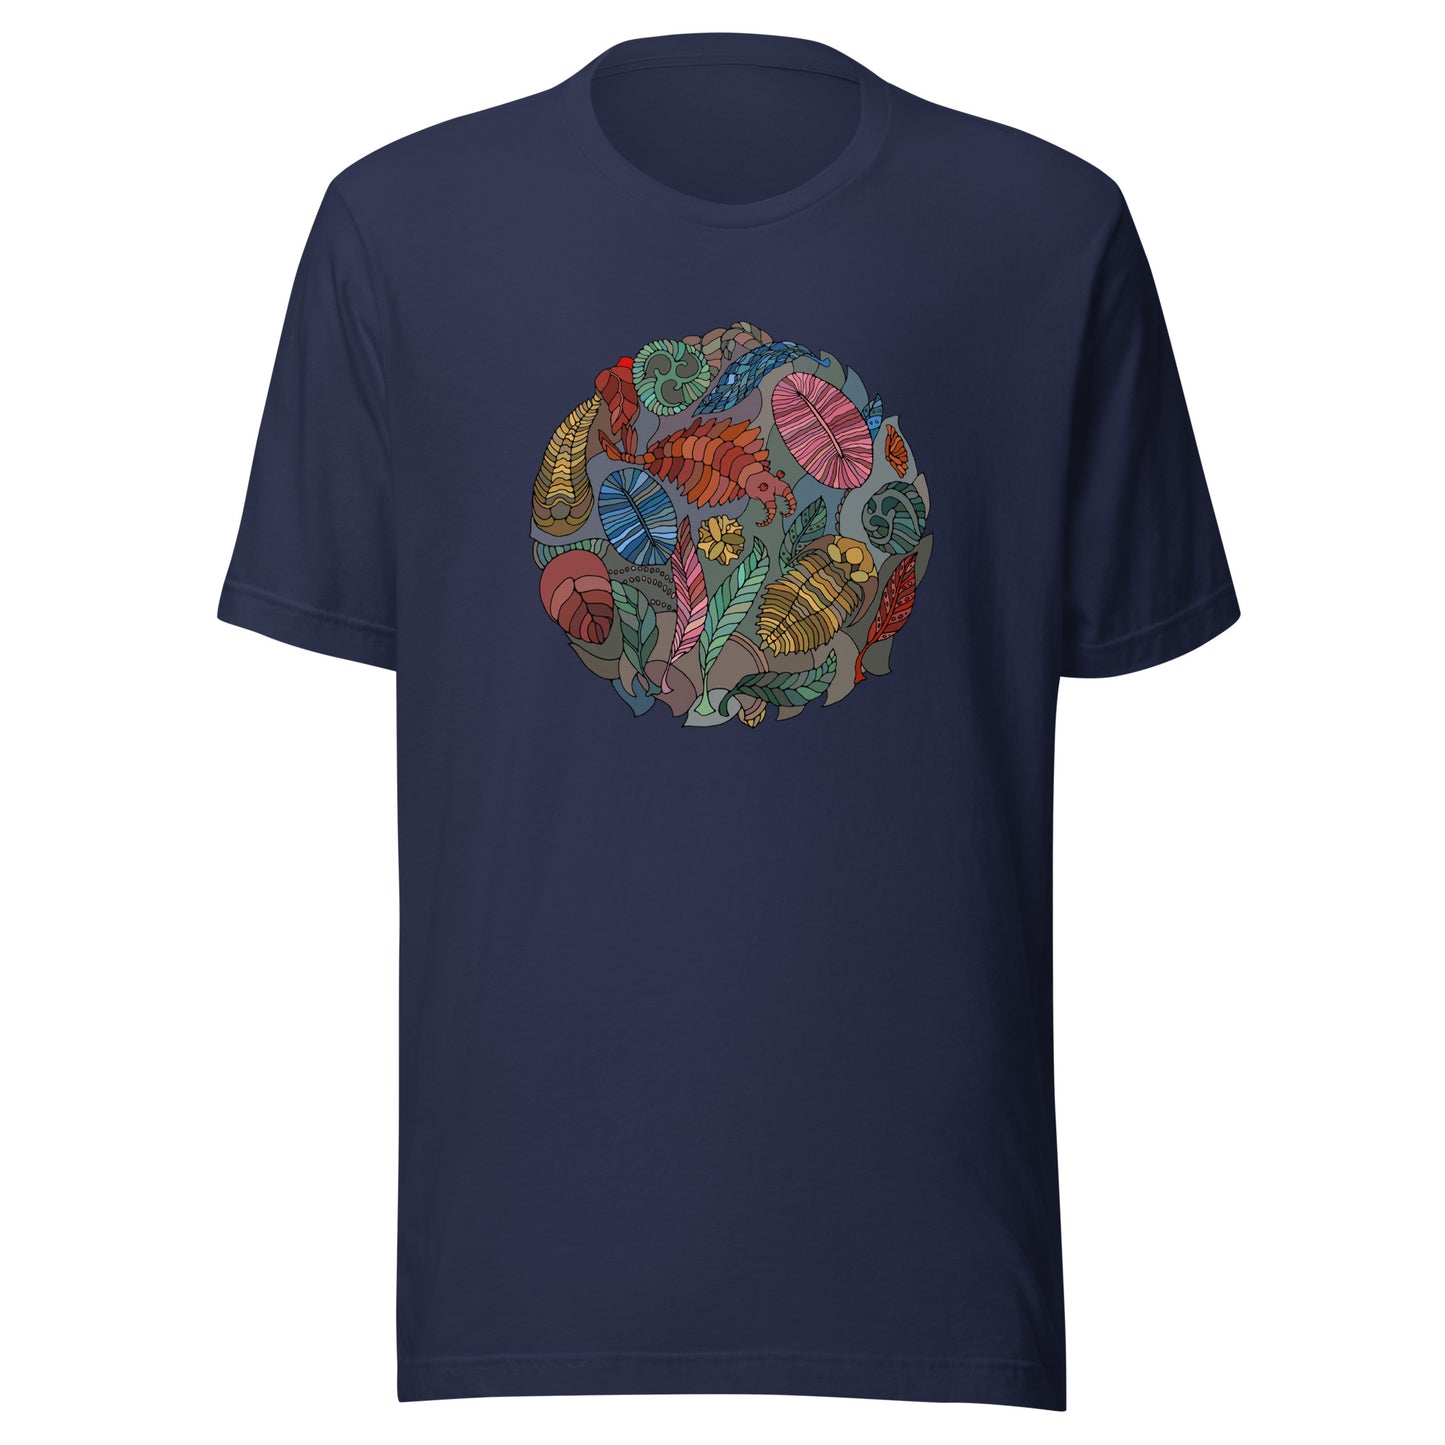 Cambrian Explosion T-Shirt (Unisex)